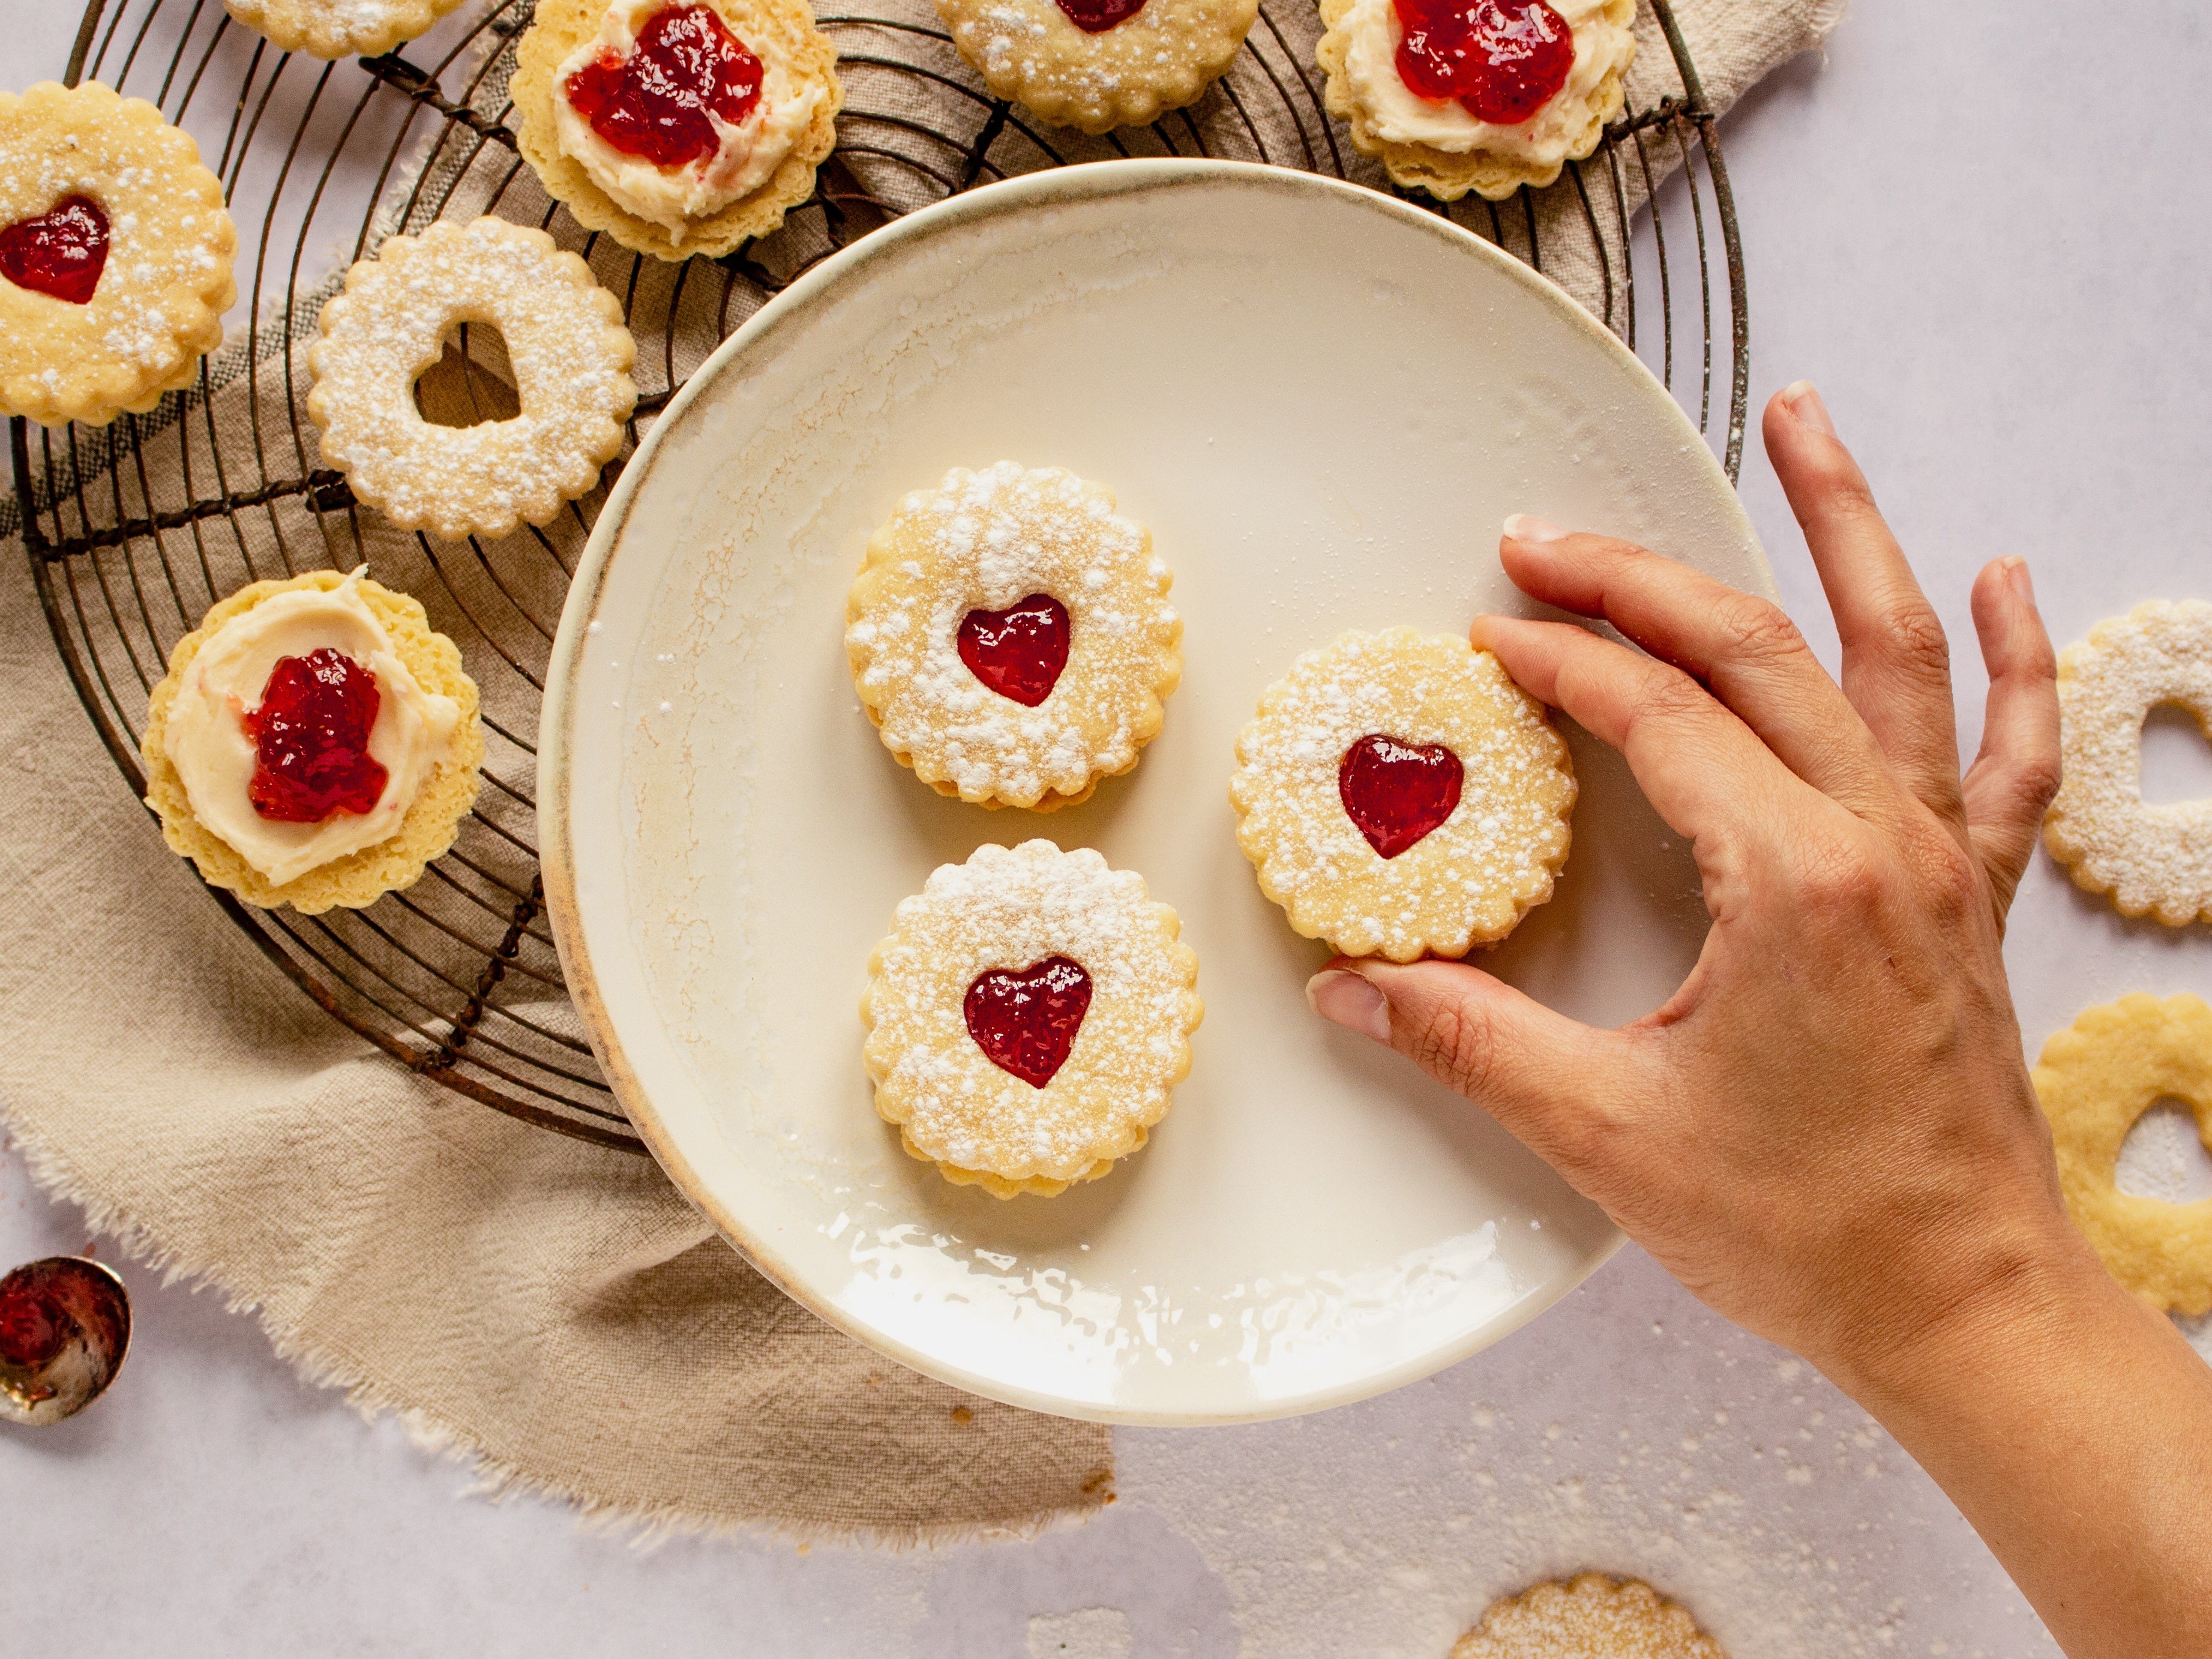 3 Jammy Dodgers on white plate with hand reaching in. Pulled apart biscuits on cooling rack